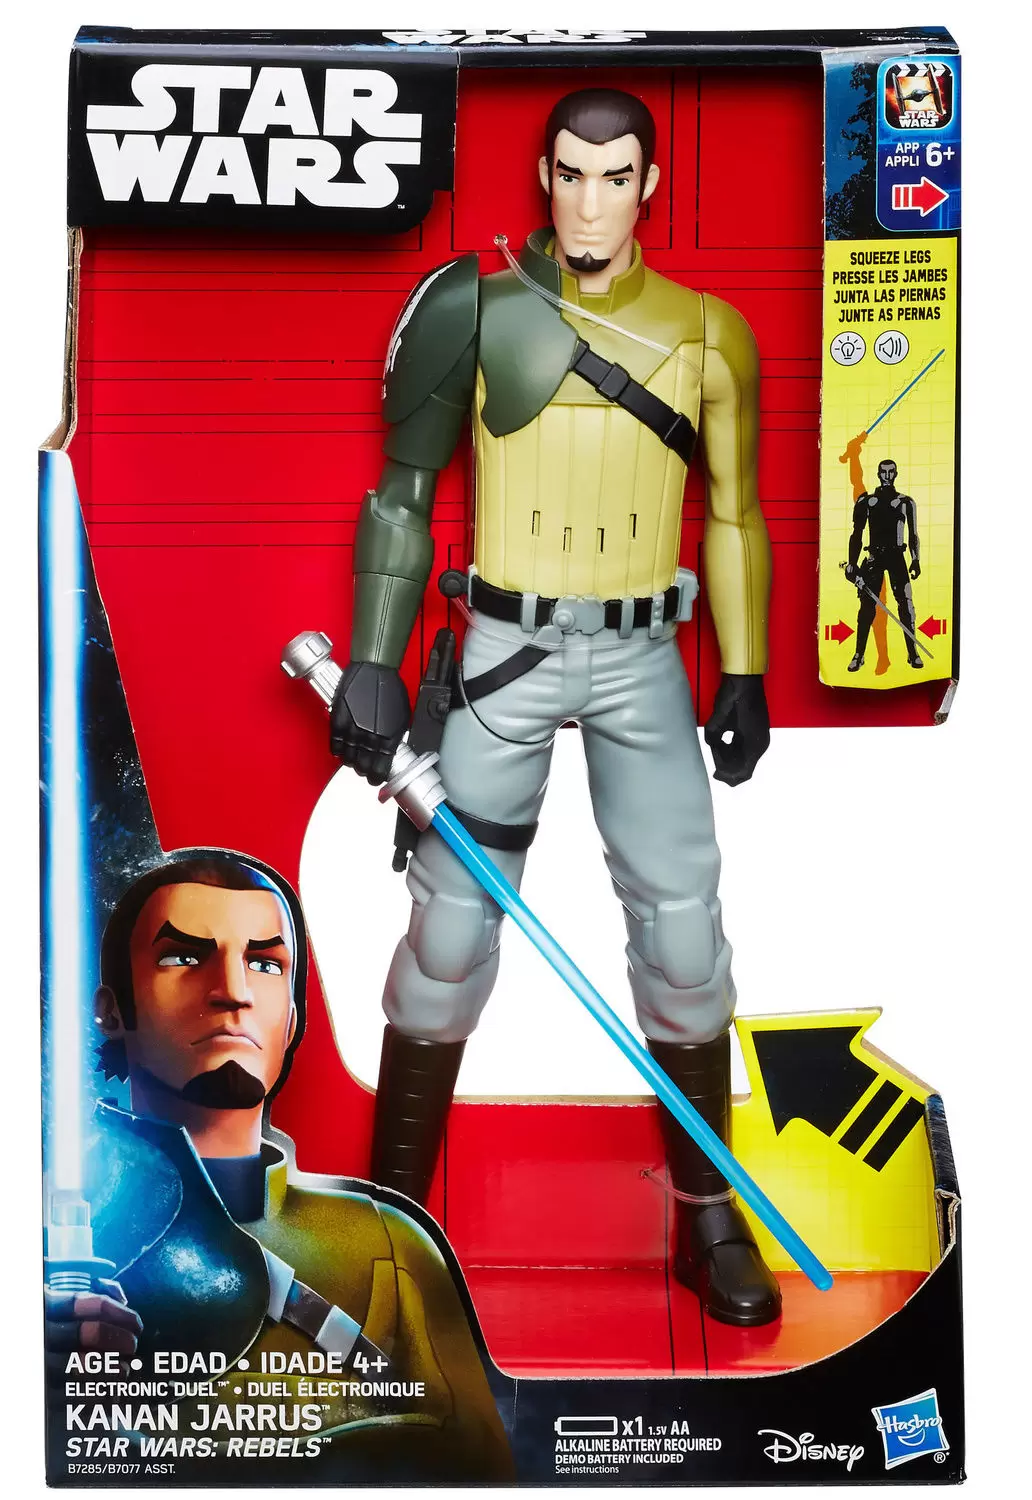 Kanan Jarrus (12 inches) - Star Wars Rebels - Rogue One action figure